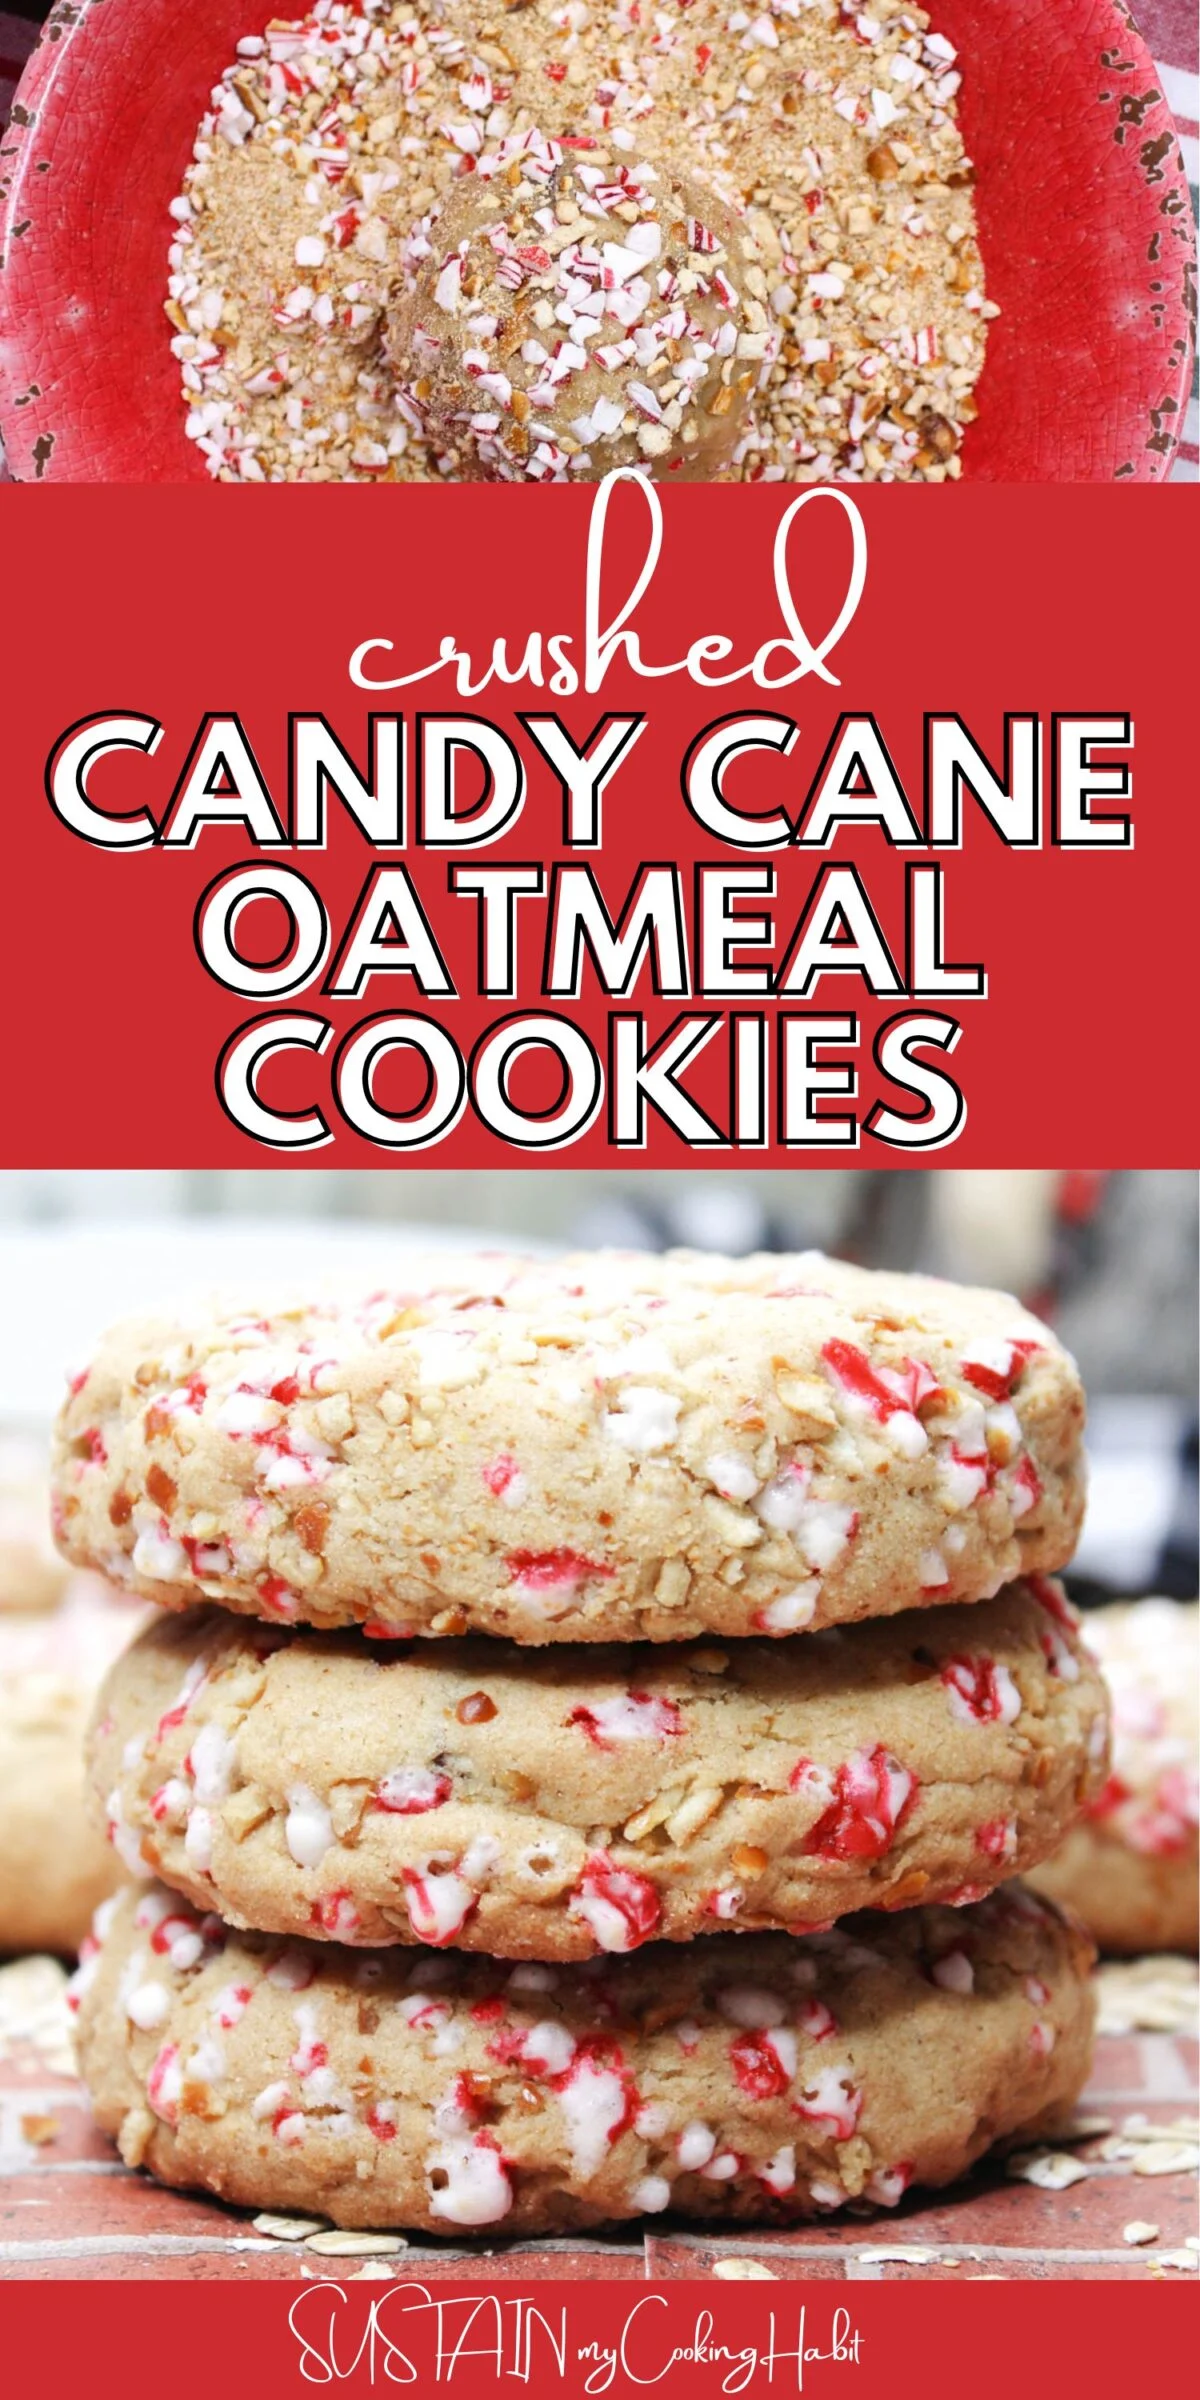 Collage of crushed candy canes and Crushed candy can oatmeal cookies with text overlay.